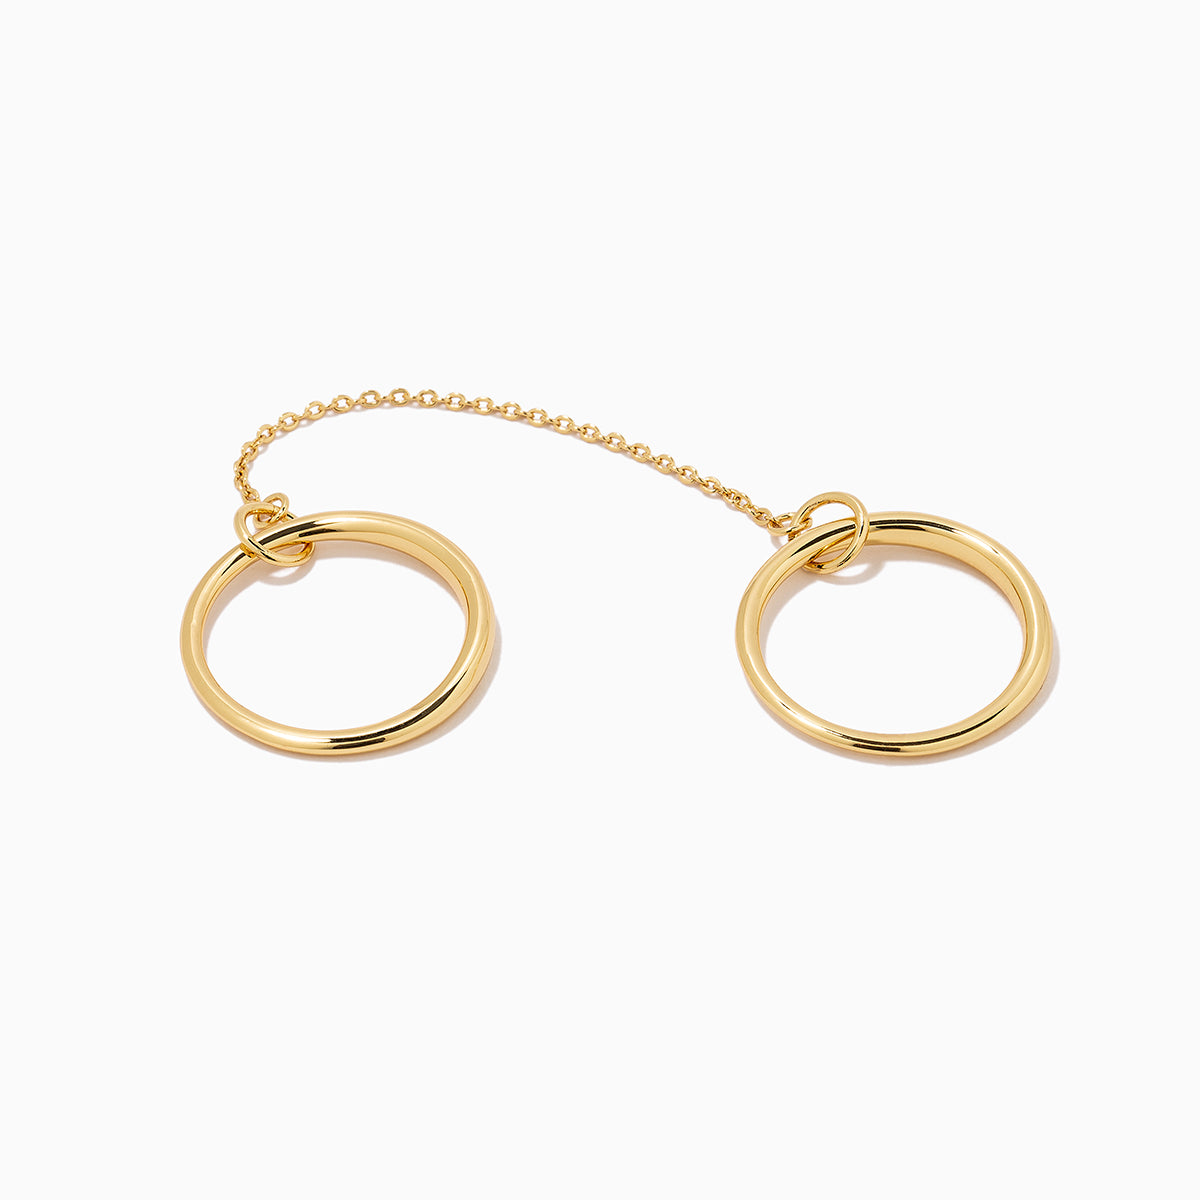 Twice the Fun Ring | Gold | Product Image | Uncommon James